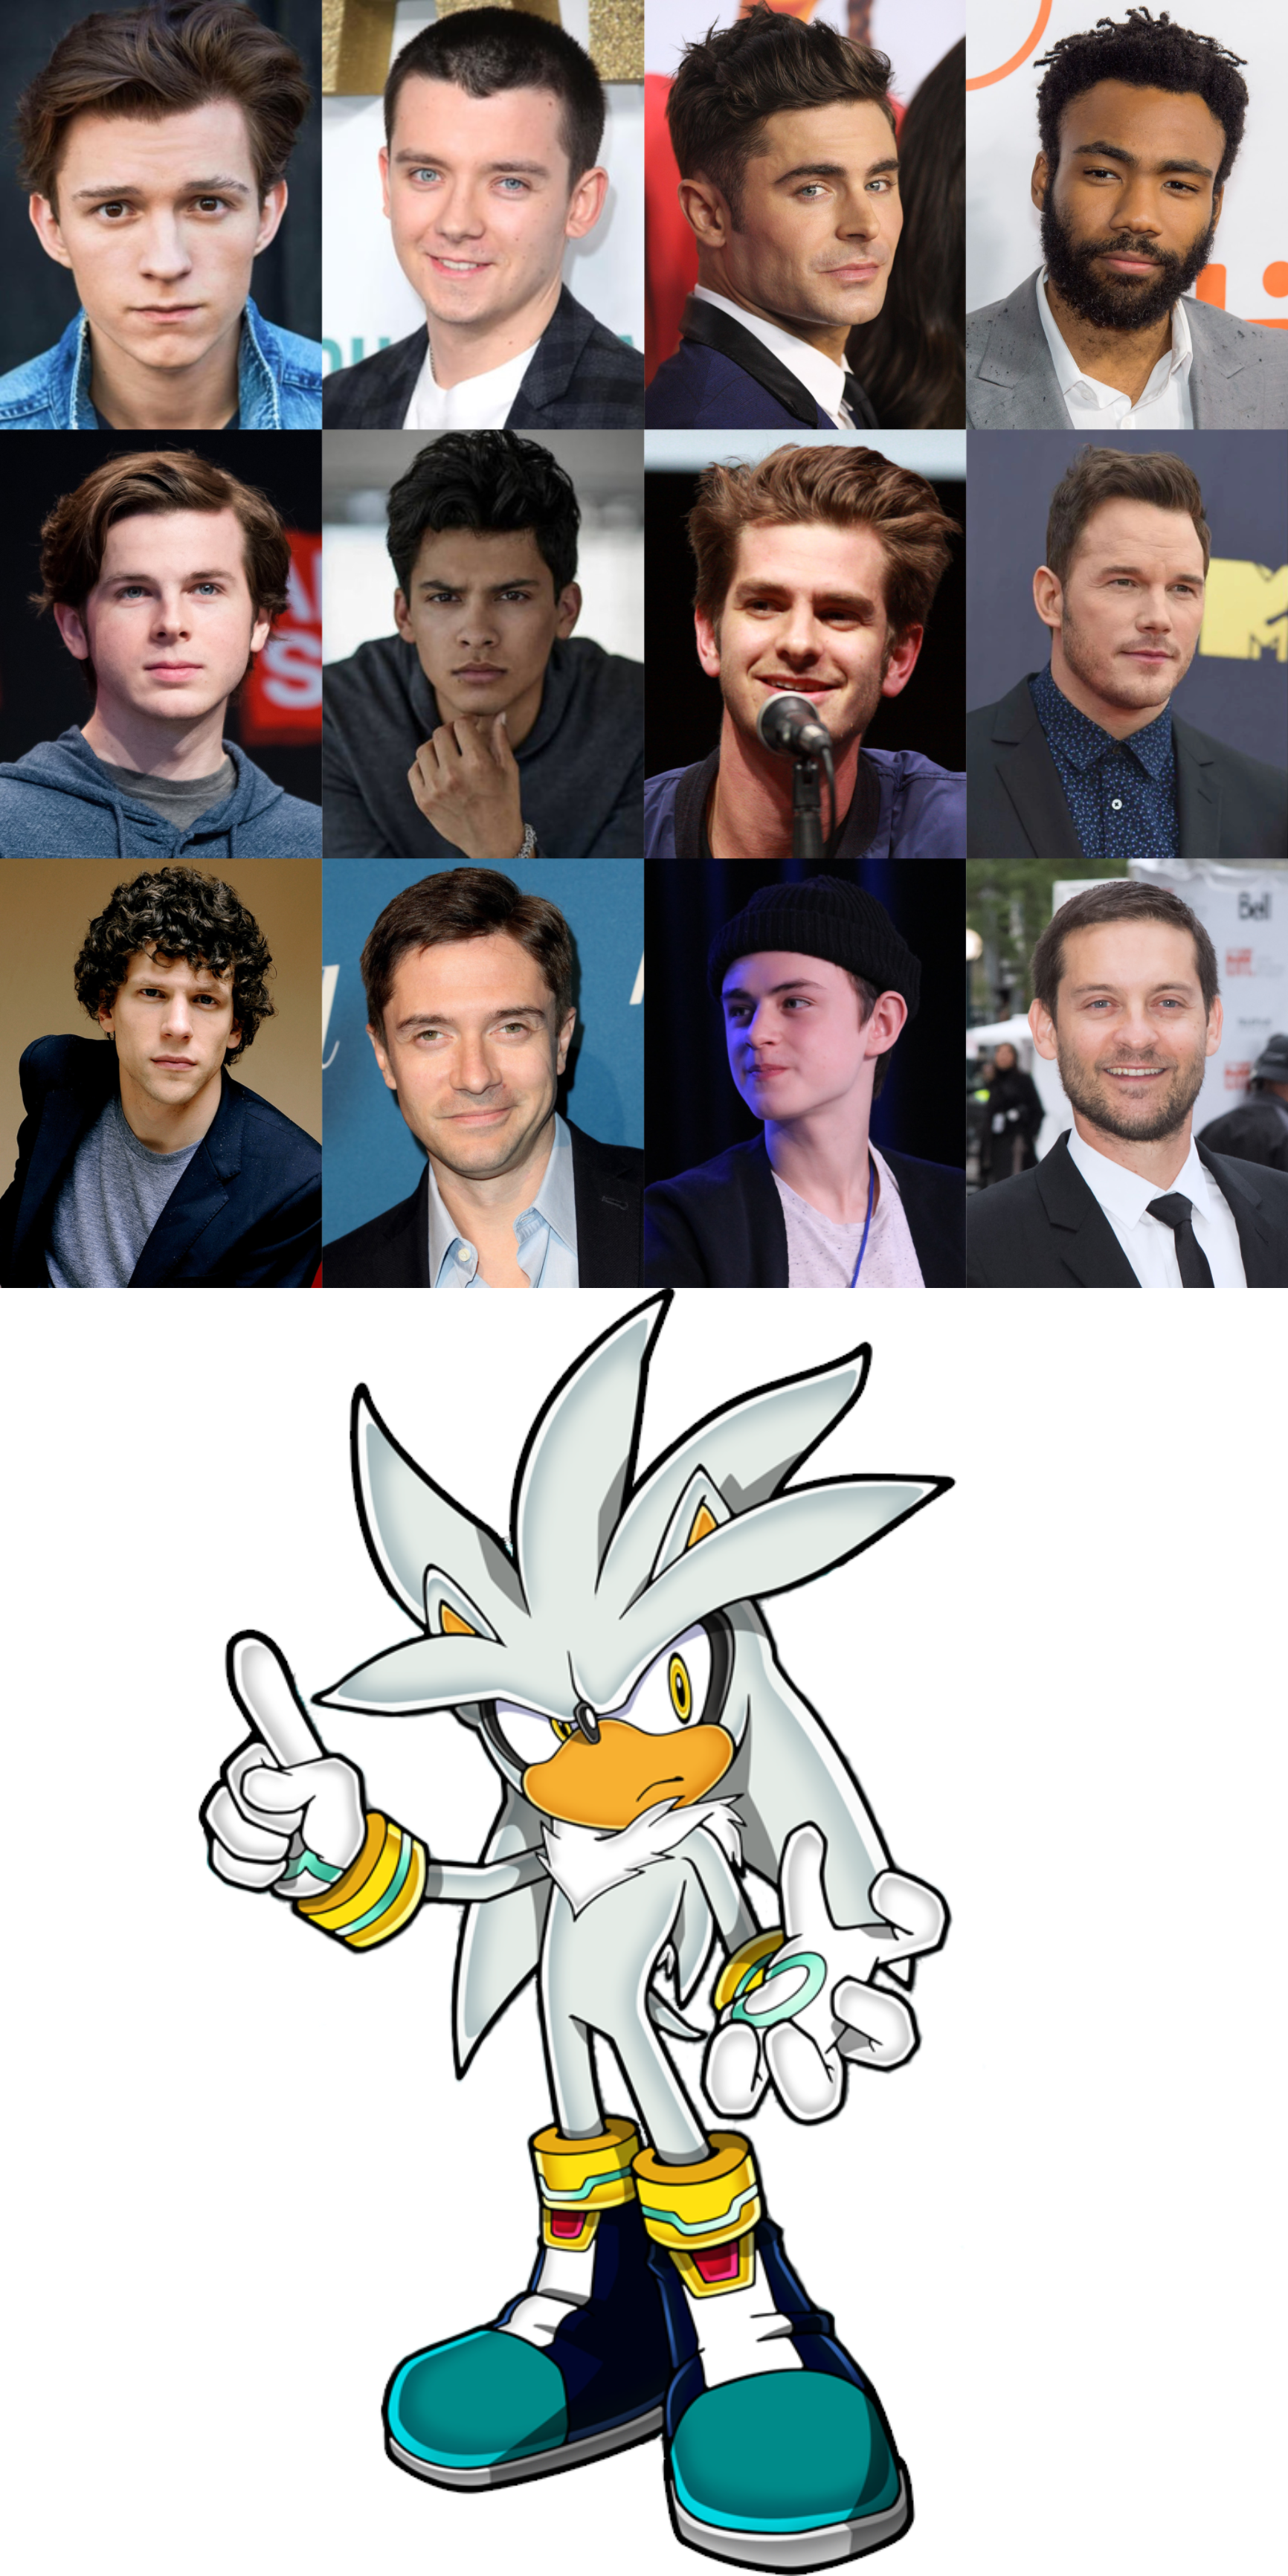 Shadow the Hedgehog (a sonic movie spinoff) Fan Casting on myCast